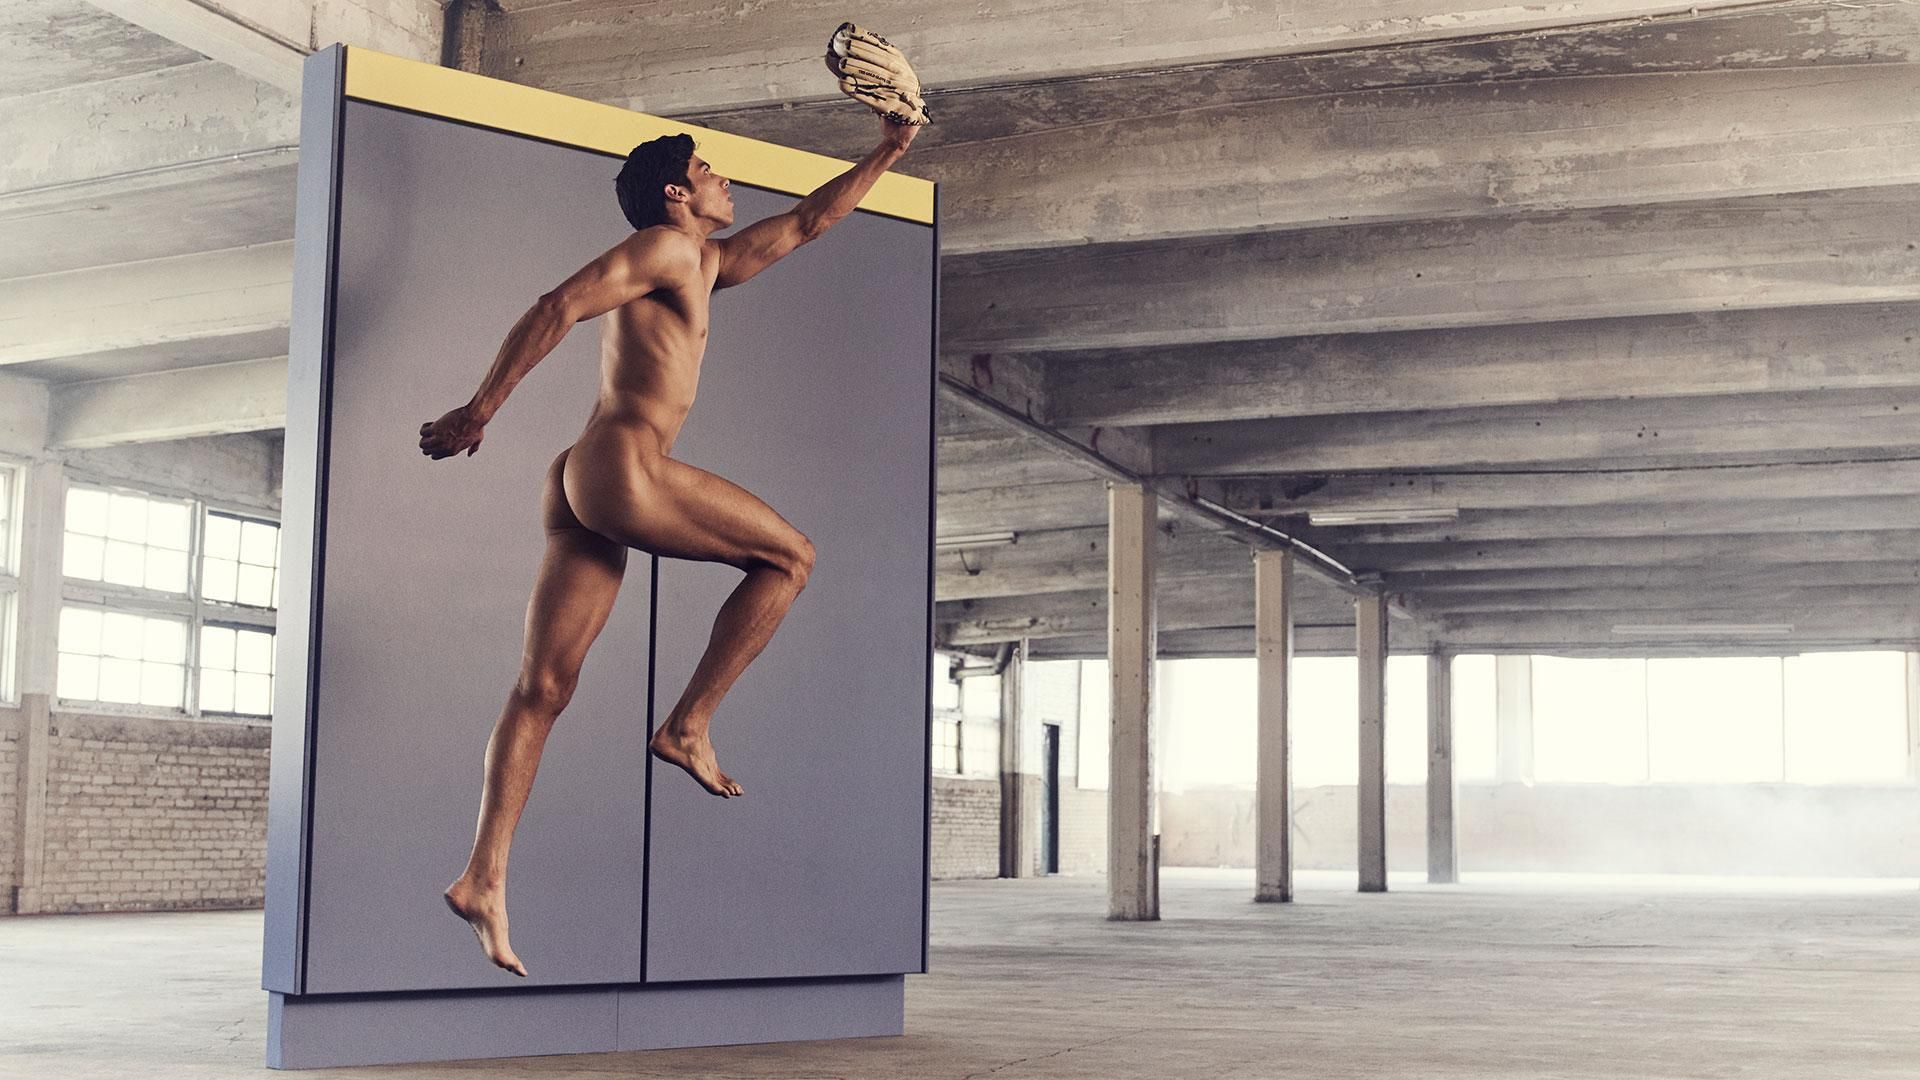 Behind the scenes of Christian Yelich's Body Issue shoot - ESPN Video.